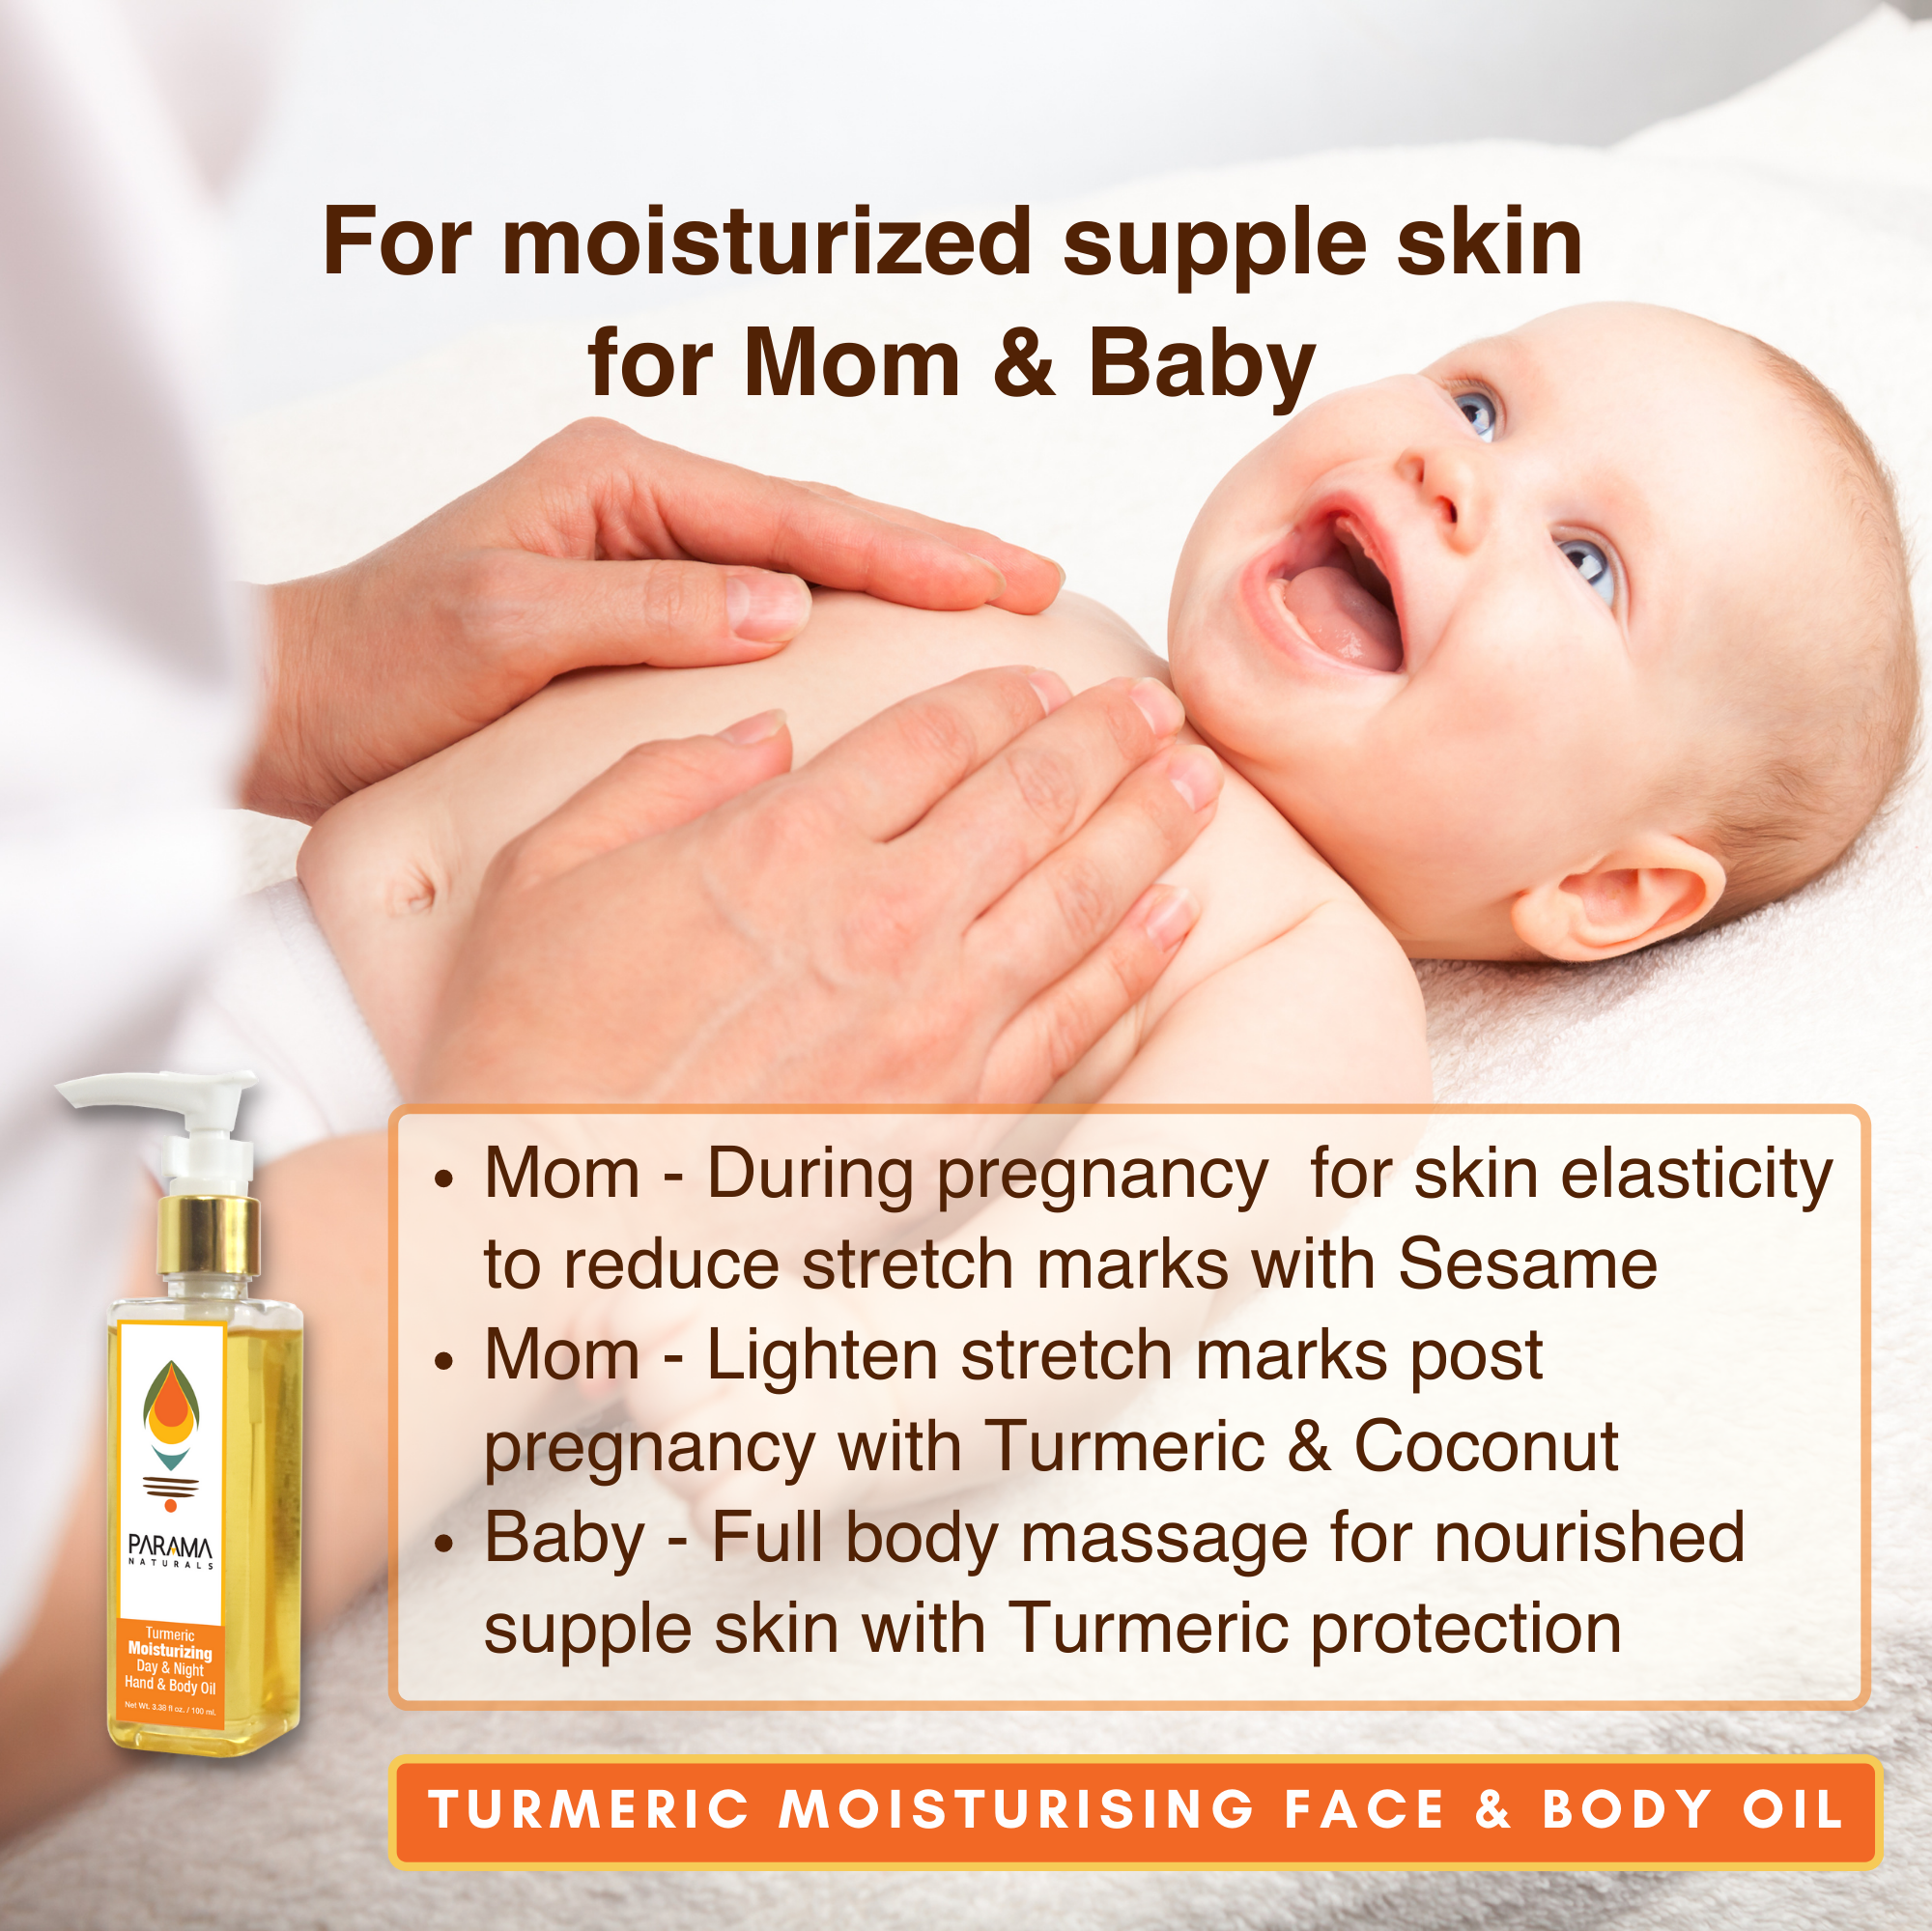 Turmeric Moisturizer Face & Body Oil, Parama Naturals, Stretch Marks, Body Massage Oil, Mom & Baby Gift Set, Skin Care, Beauty Products,